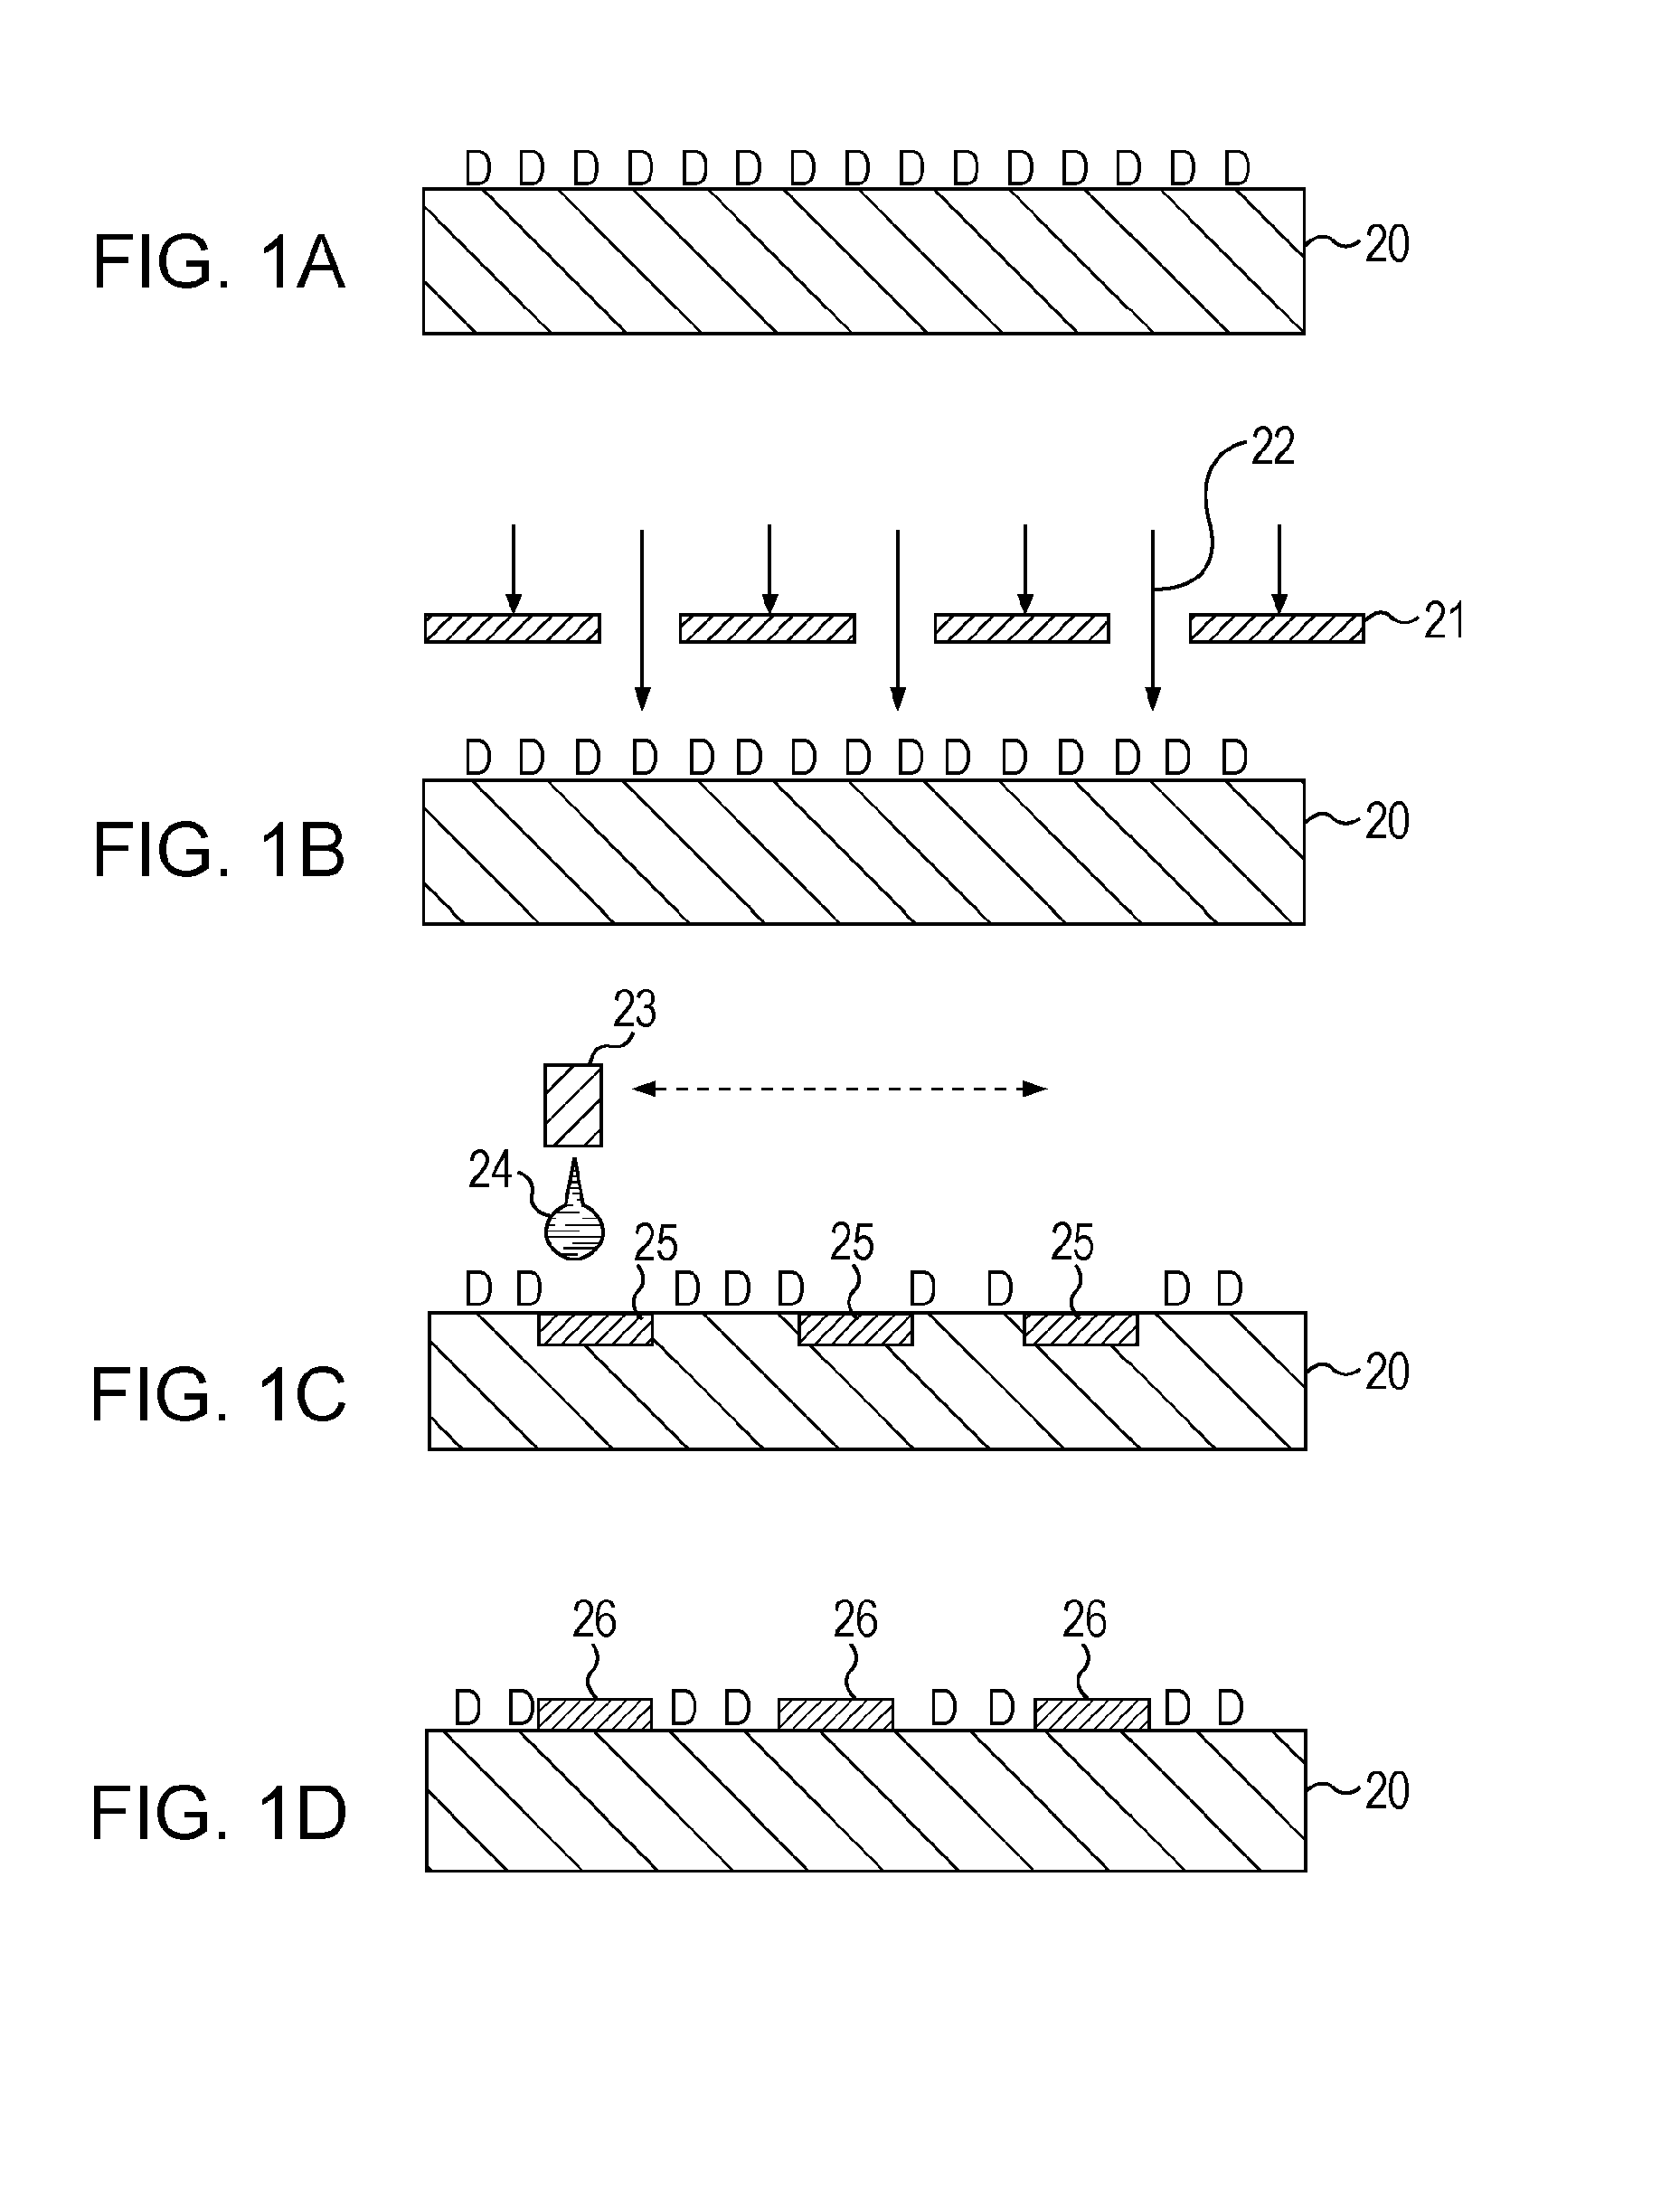 Patterning method and methods for producing electro-optic device, color filter, illuminant, and thin-film tranisistor